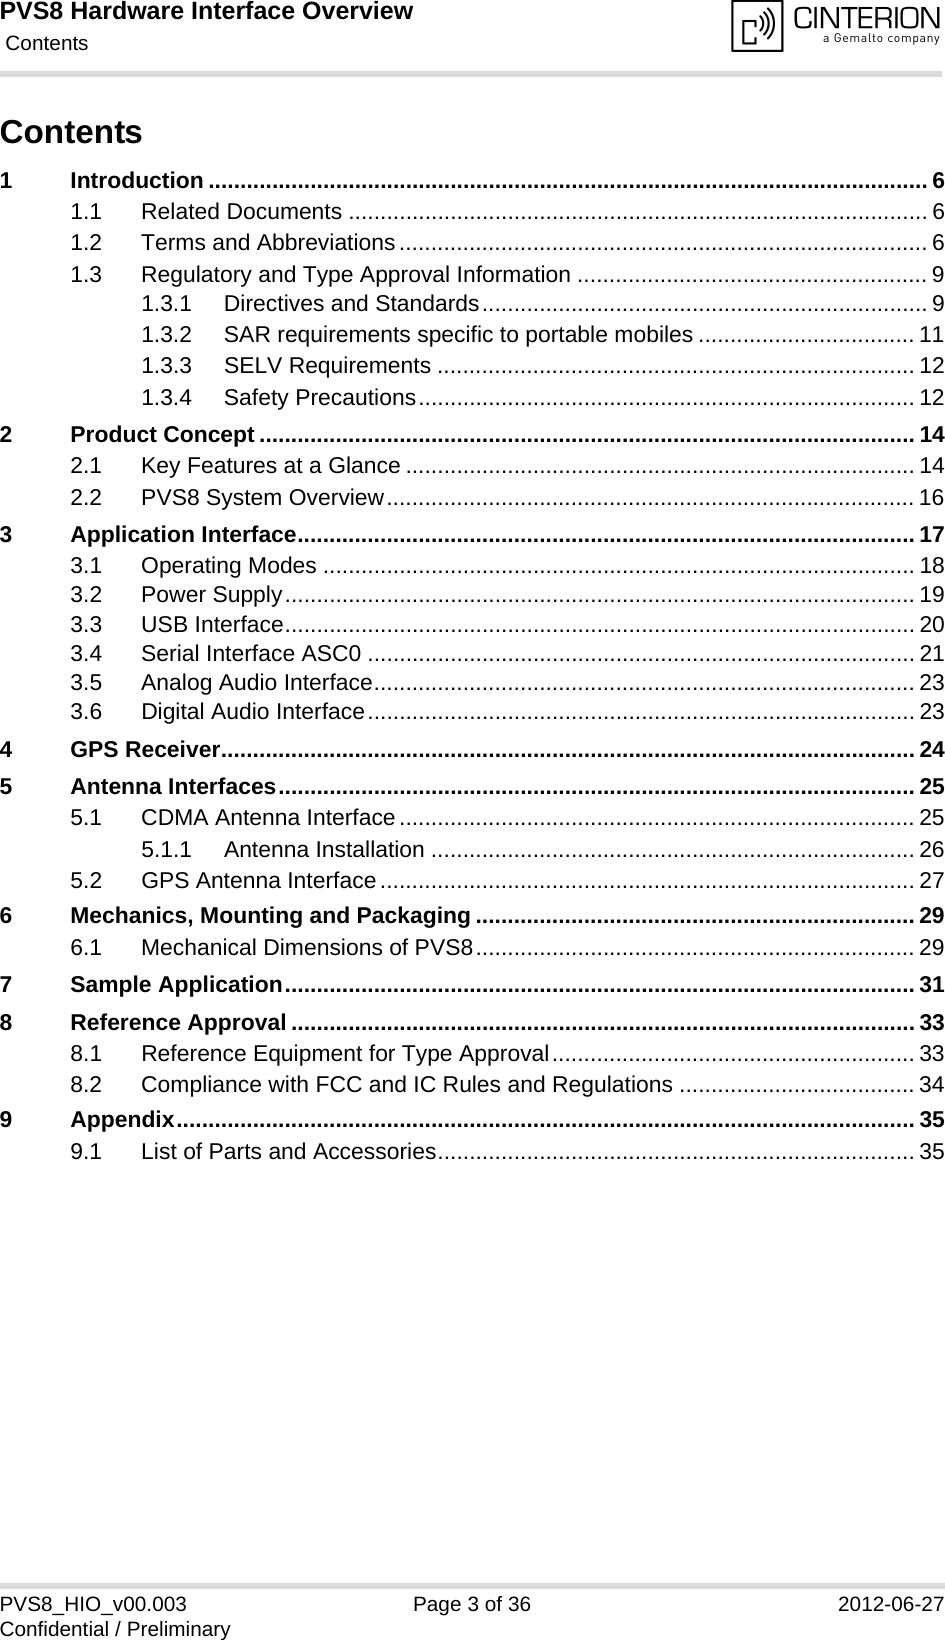 PVS8 Hardware Interface Overview Contents36PVS8_HIO_v00.003 Page 3 of 36 2012-06-27Confidential / PreliminaryContents1 Introduction ................................................................................................................. 61.1 Related Documents ........................................................................................... 61.2 Terms and Abbreviations................................................................................... 61.3 Regulatory and Type Approval Information ....................................................... 91.3.1 Directives and Standards...................................................................... 91.3.2 SAR requirements specific to portable mobiles .................................. 111.3.3 SELV Requirements ........................................................................... 121.3.4 Safety Precautions.............................................................................. 122 Product Concept ....................................................................................................... 142.1 Key Features at a Glance ................................................................................ 142.2 PVS8 System Overview................................................................................... 163 Application Interface................................................................................................. 173.1 Operating Modes ............................................................................................. 183.2 Power Supply................................................................................................... 193.3 USB Interface................................................................................................... 203.4 Serial Interface ASC0 ...................................................................................... 213.5 Analog Audio Interface..................................................................................... 233.6 Digital Audio Interface...................................................................................... 234 GPS Receiver............................................................................................................. 245 Antenna Interfaces.................................................................................................... 255.1 CDMA Antenna Interface................................................................................. 255.1.1 Antenna Installation ............................................................................ 265.2 GPS Antenna Interface.................................................................................... 276 Mechanics, Mounting and Packaging ..................................................................... 296.1 Mechanical Dimensions of PVS8..................................................................... 297 Sample Application................................................................................................... 318 Reference Approval .................................................................................................. 338.1 Reference Equipment for Type Approval......................................................... 338.2 Compliance with FCC and IC Rules and Regulations ..................................... 349 Appendix.................................................................................................................... 359.1 List of Parts and Accessories........................................................................... 35